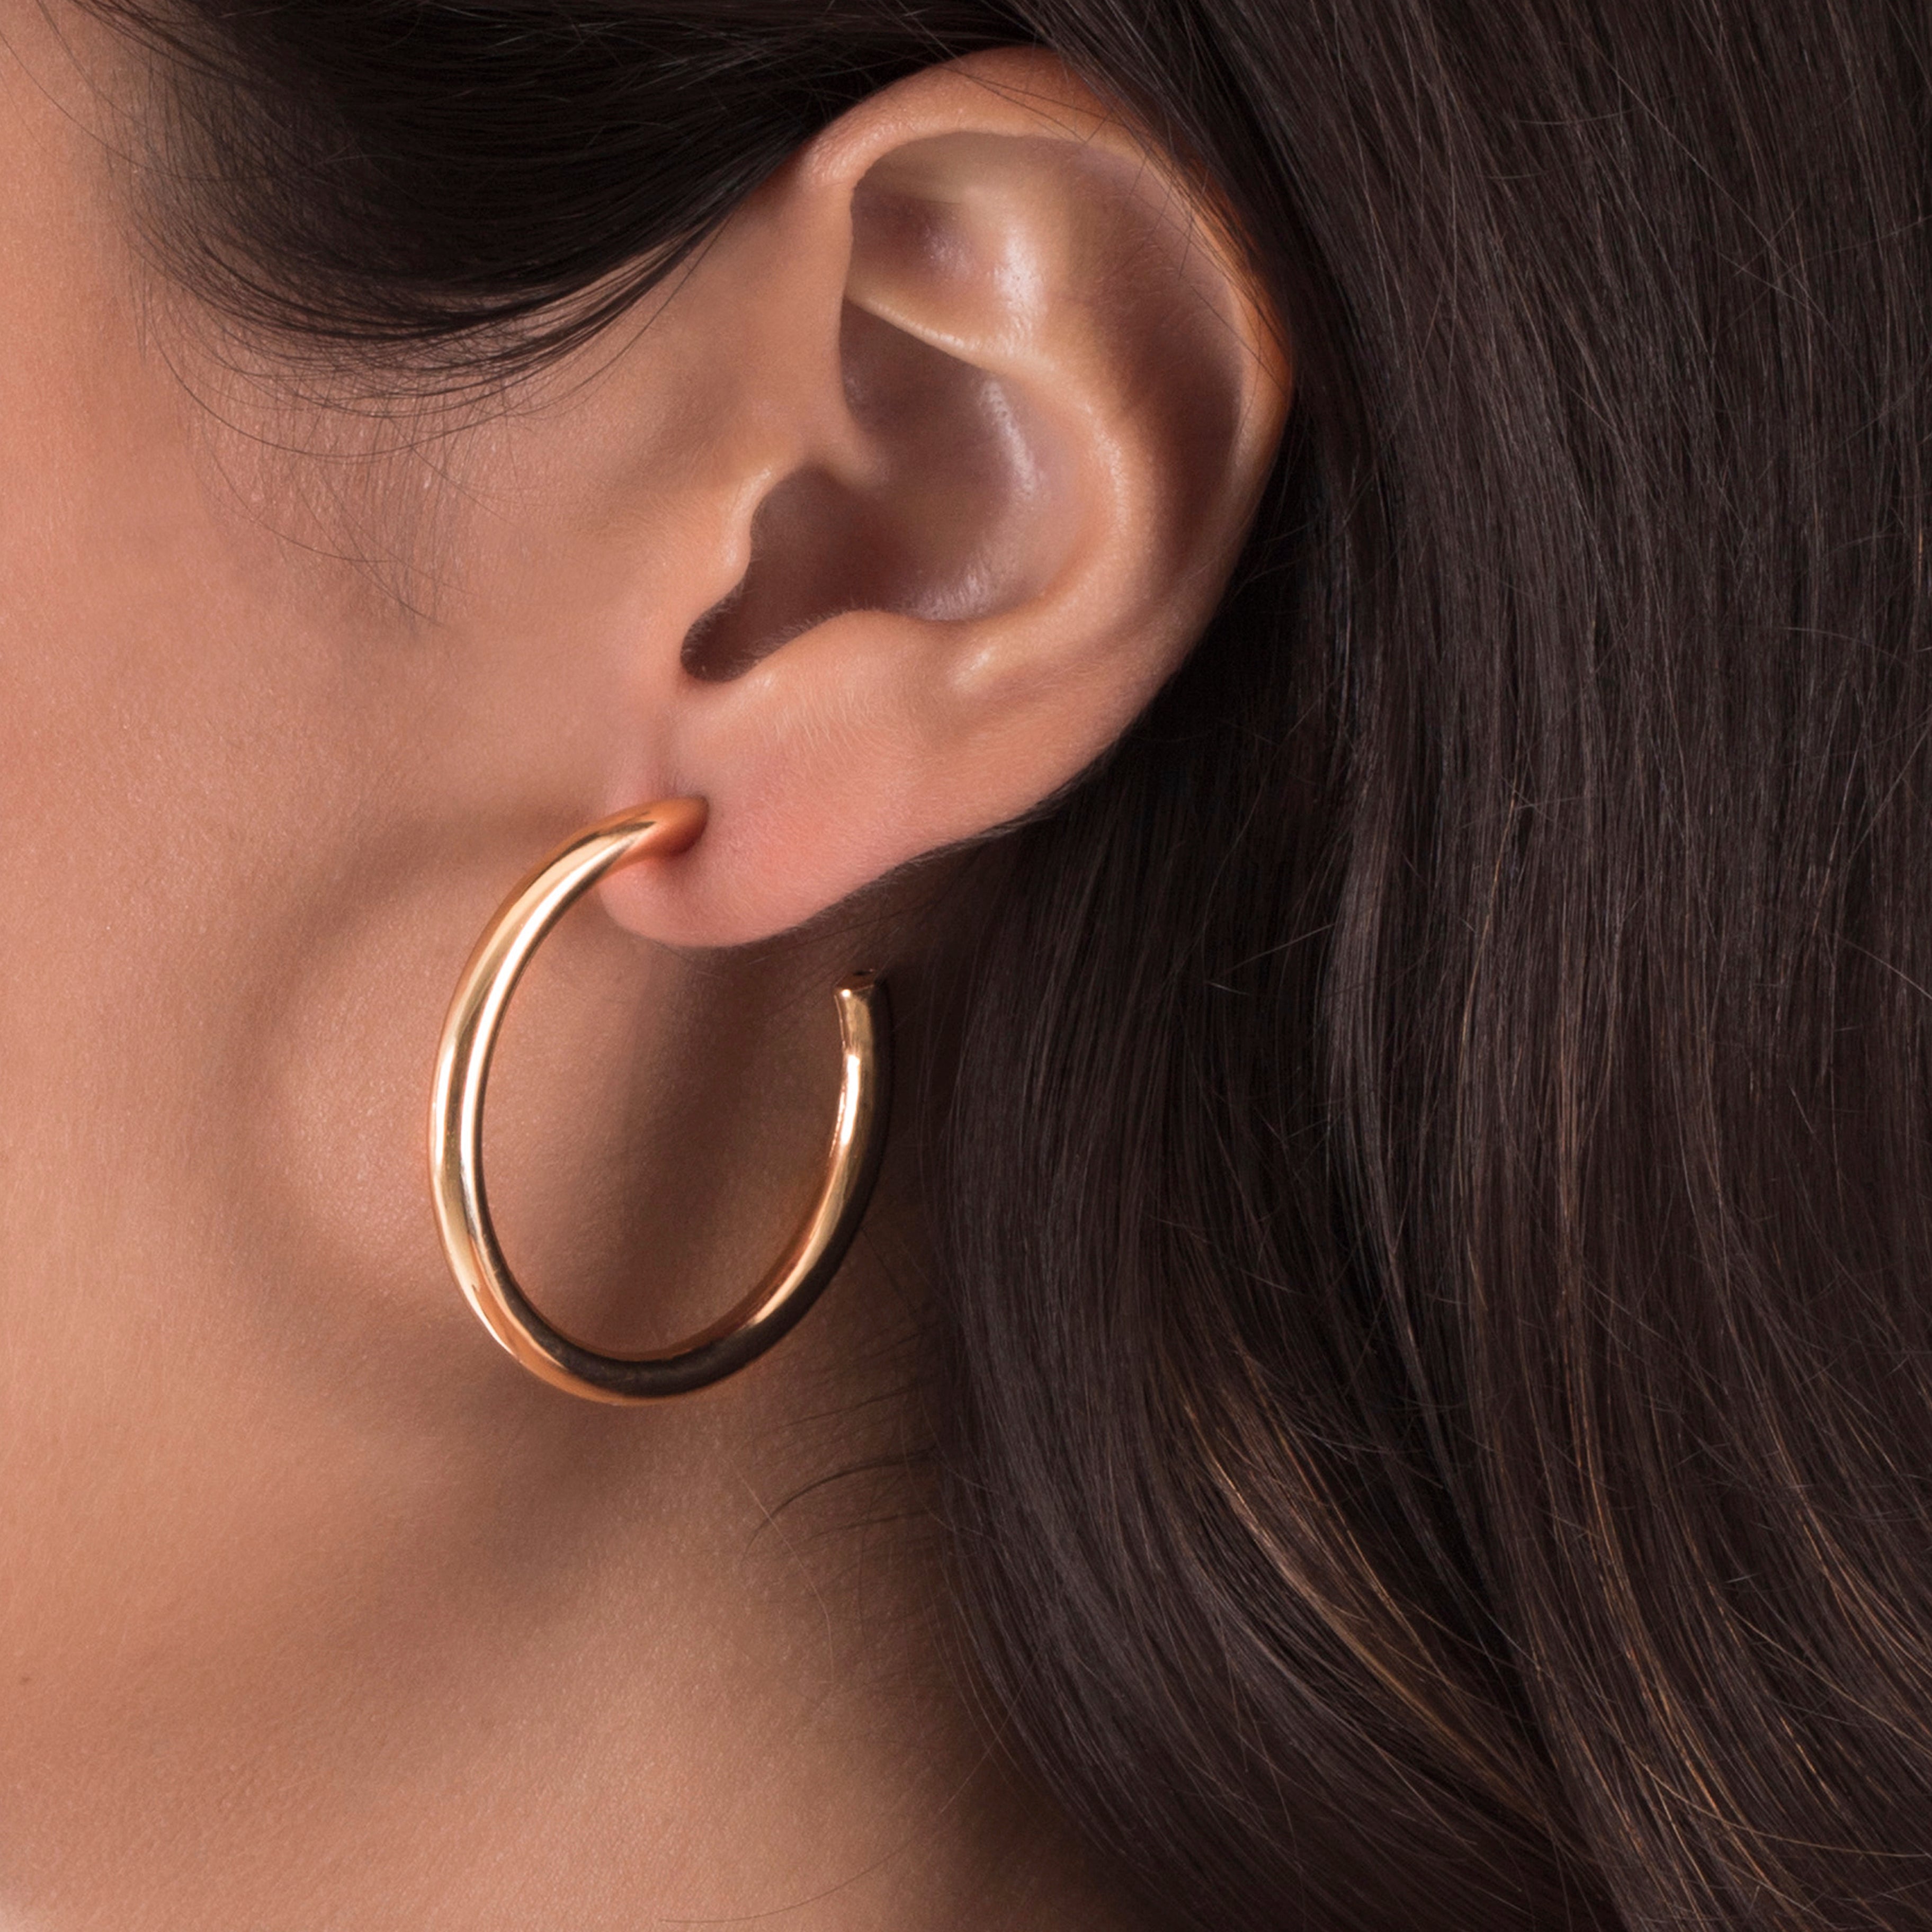 POP SMALL HOOP EARRING IN 18K YELLOW GOLD PLATED SILVER